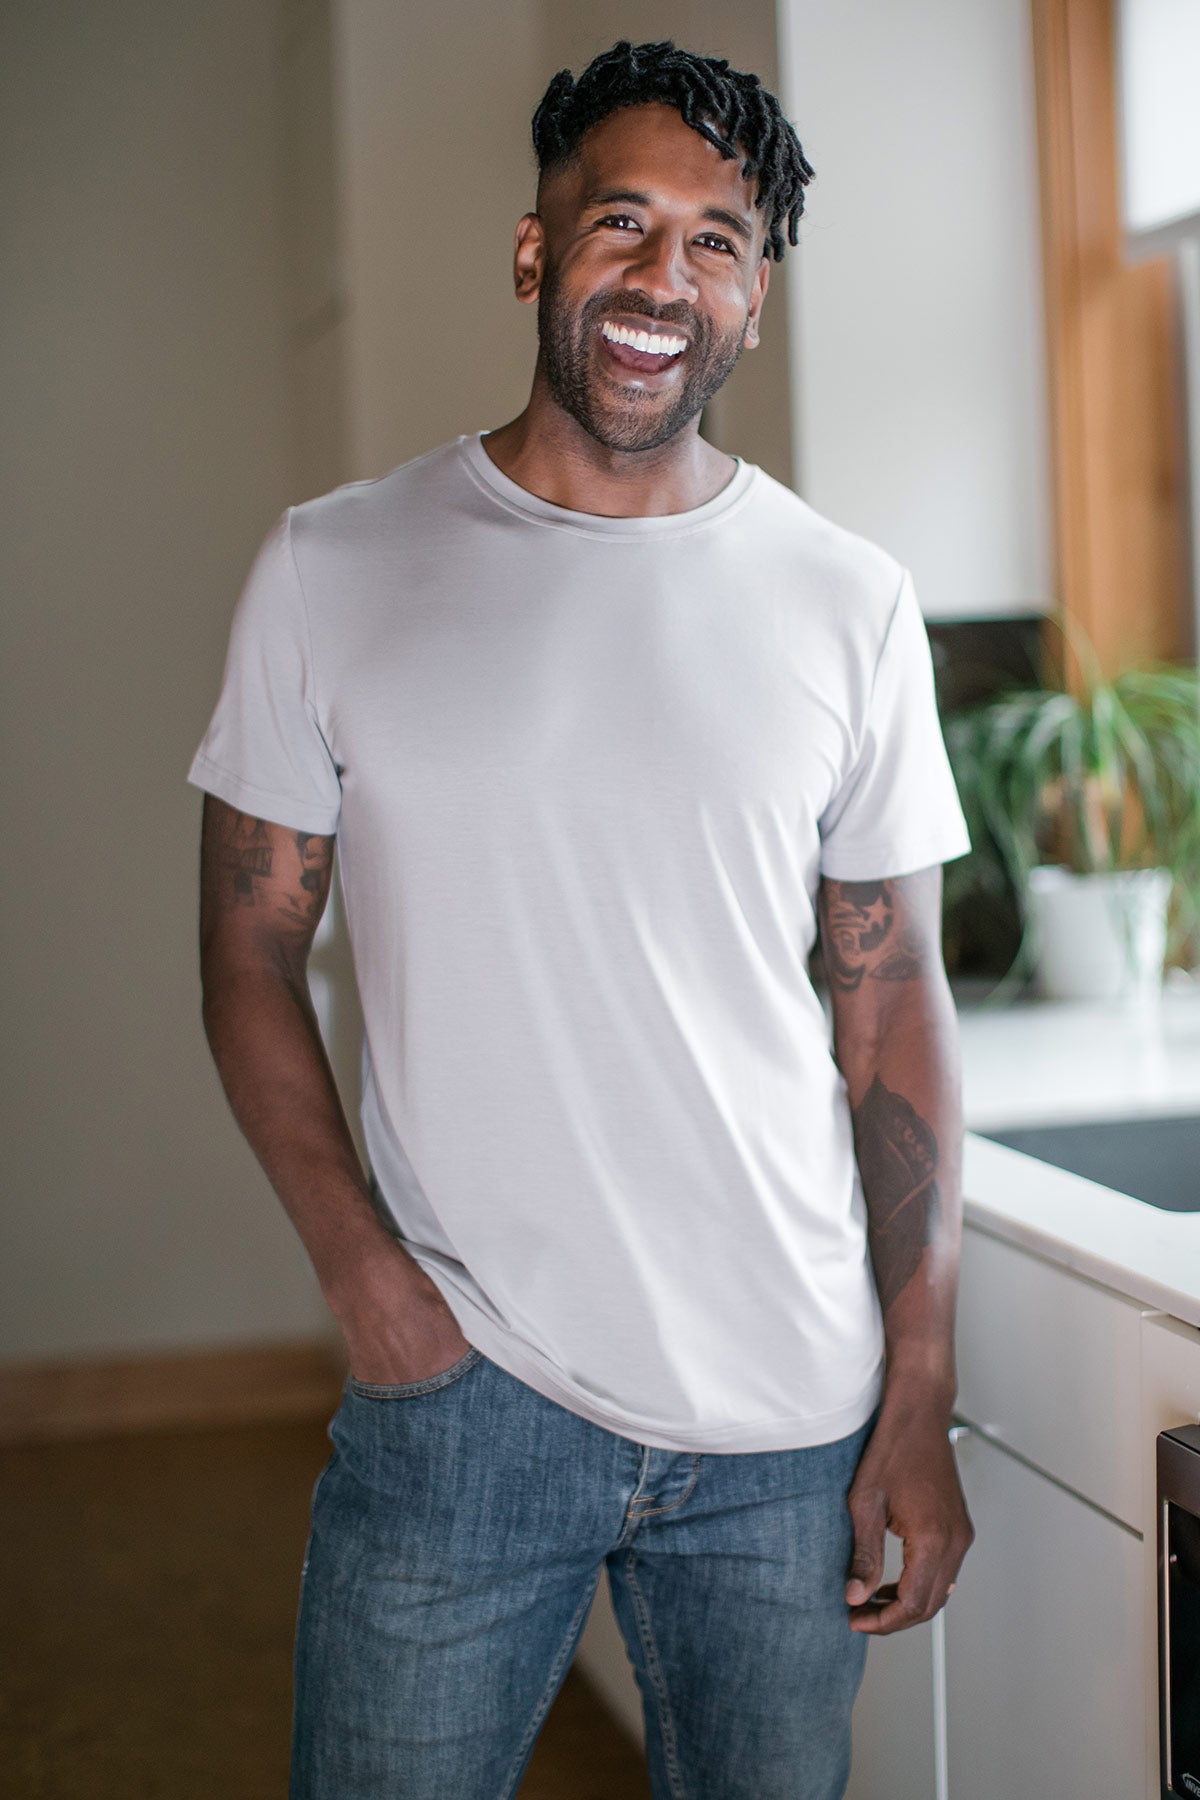 A man standing and laughing with one hand in his pocket, wearing Yala Nathan Men's Short Sleeve Bamboo Crew Tee Shirt in Ash